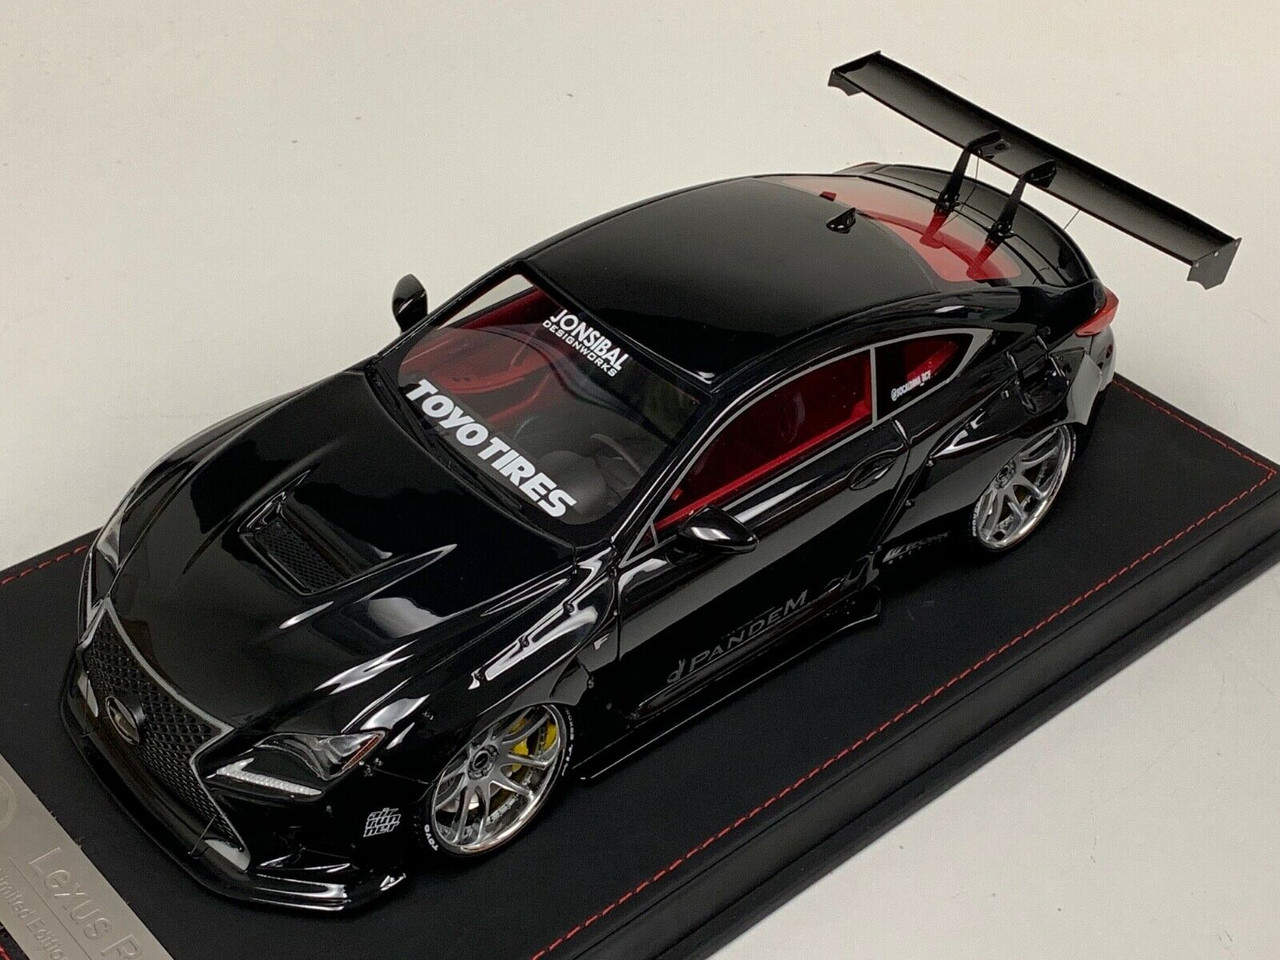 1/18 Dealer Edition Lexus RC F RCF Pandem Liberty Walk (Black with Silver Wheels) Resin Car Model Limited 100 Pieces